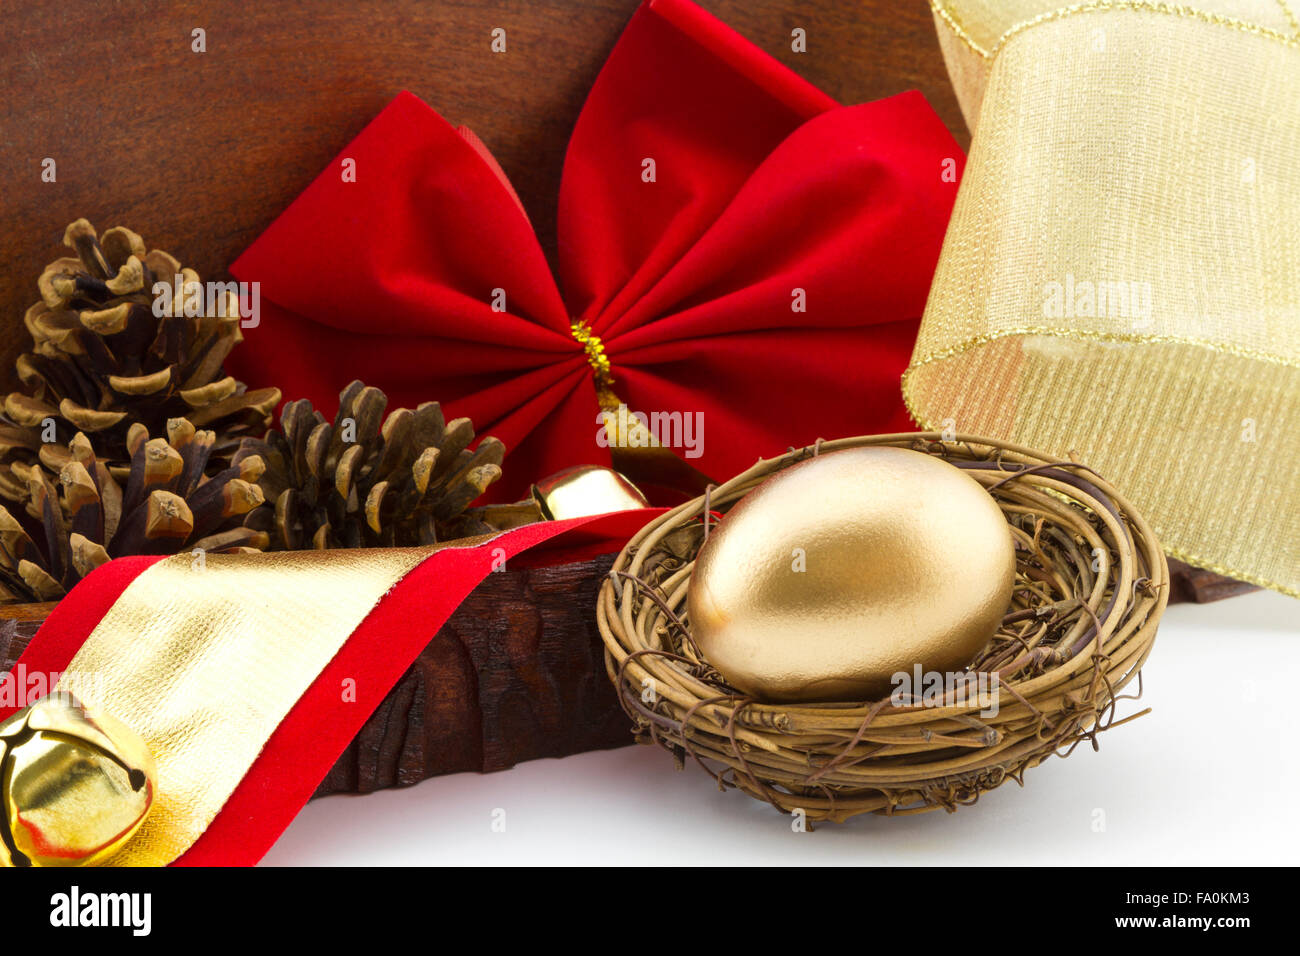 Gold egg in twig nest with holiday red bow and pine cones in wood box offers a rustic, home style view of financial savings Stock Photo